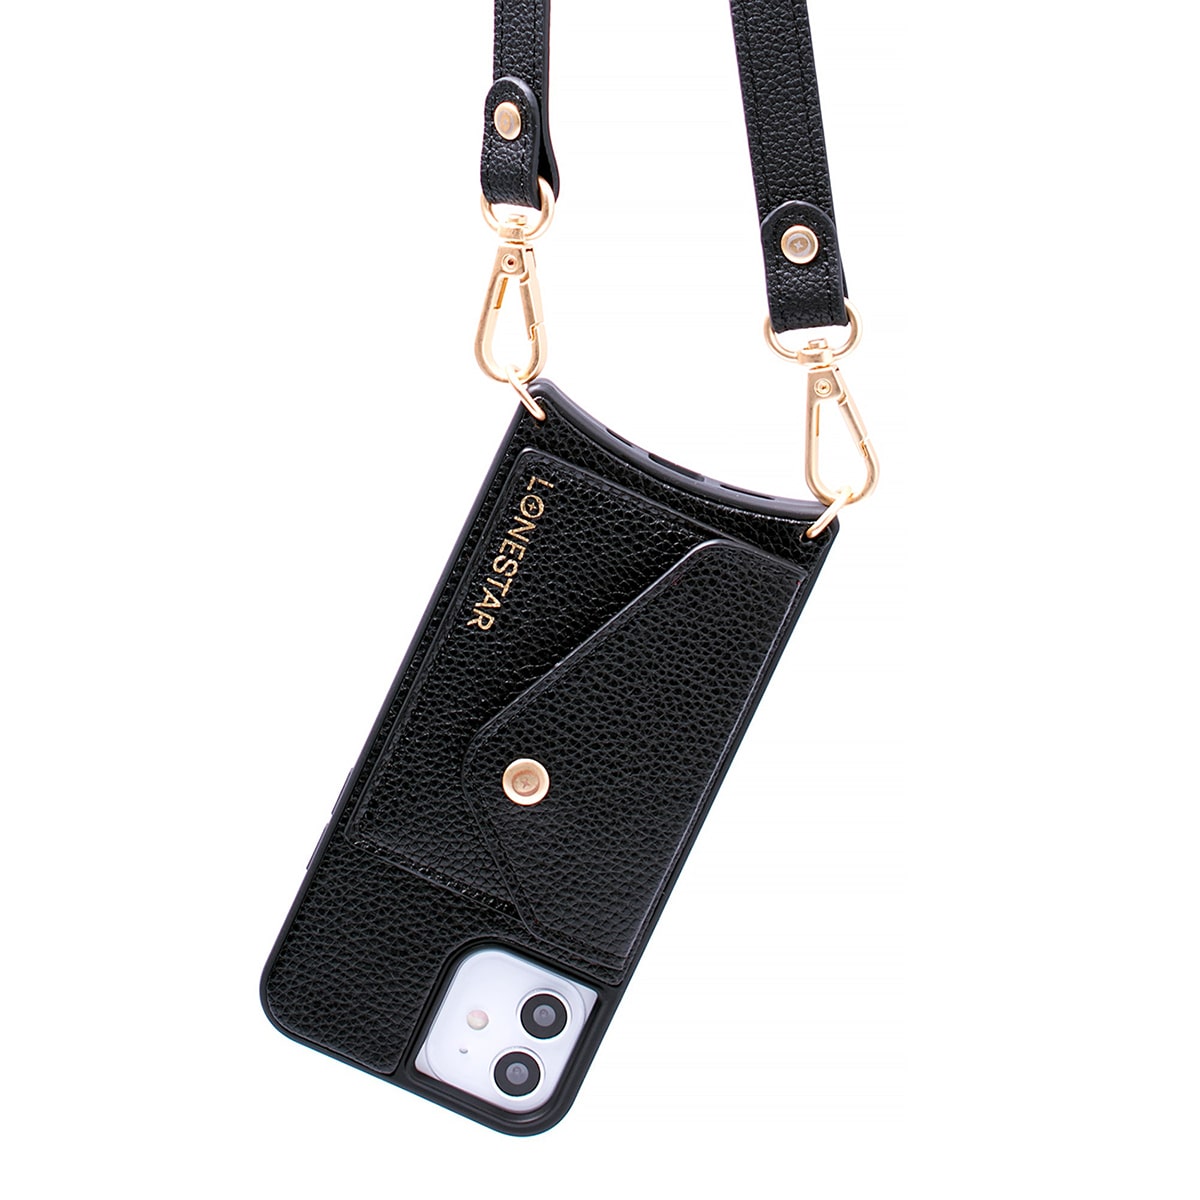 Electra iPhone 12 Case Leather Black